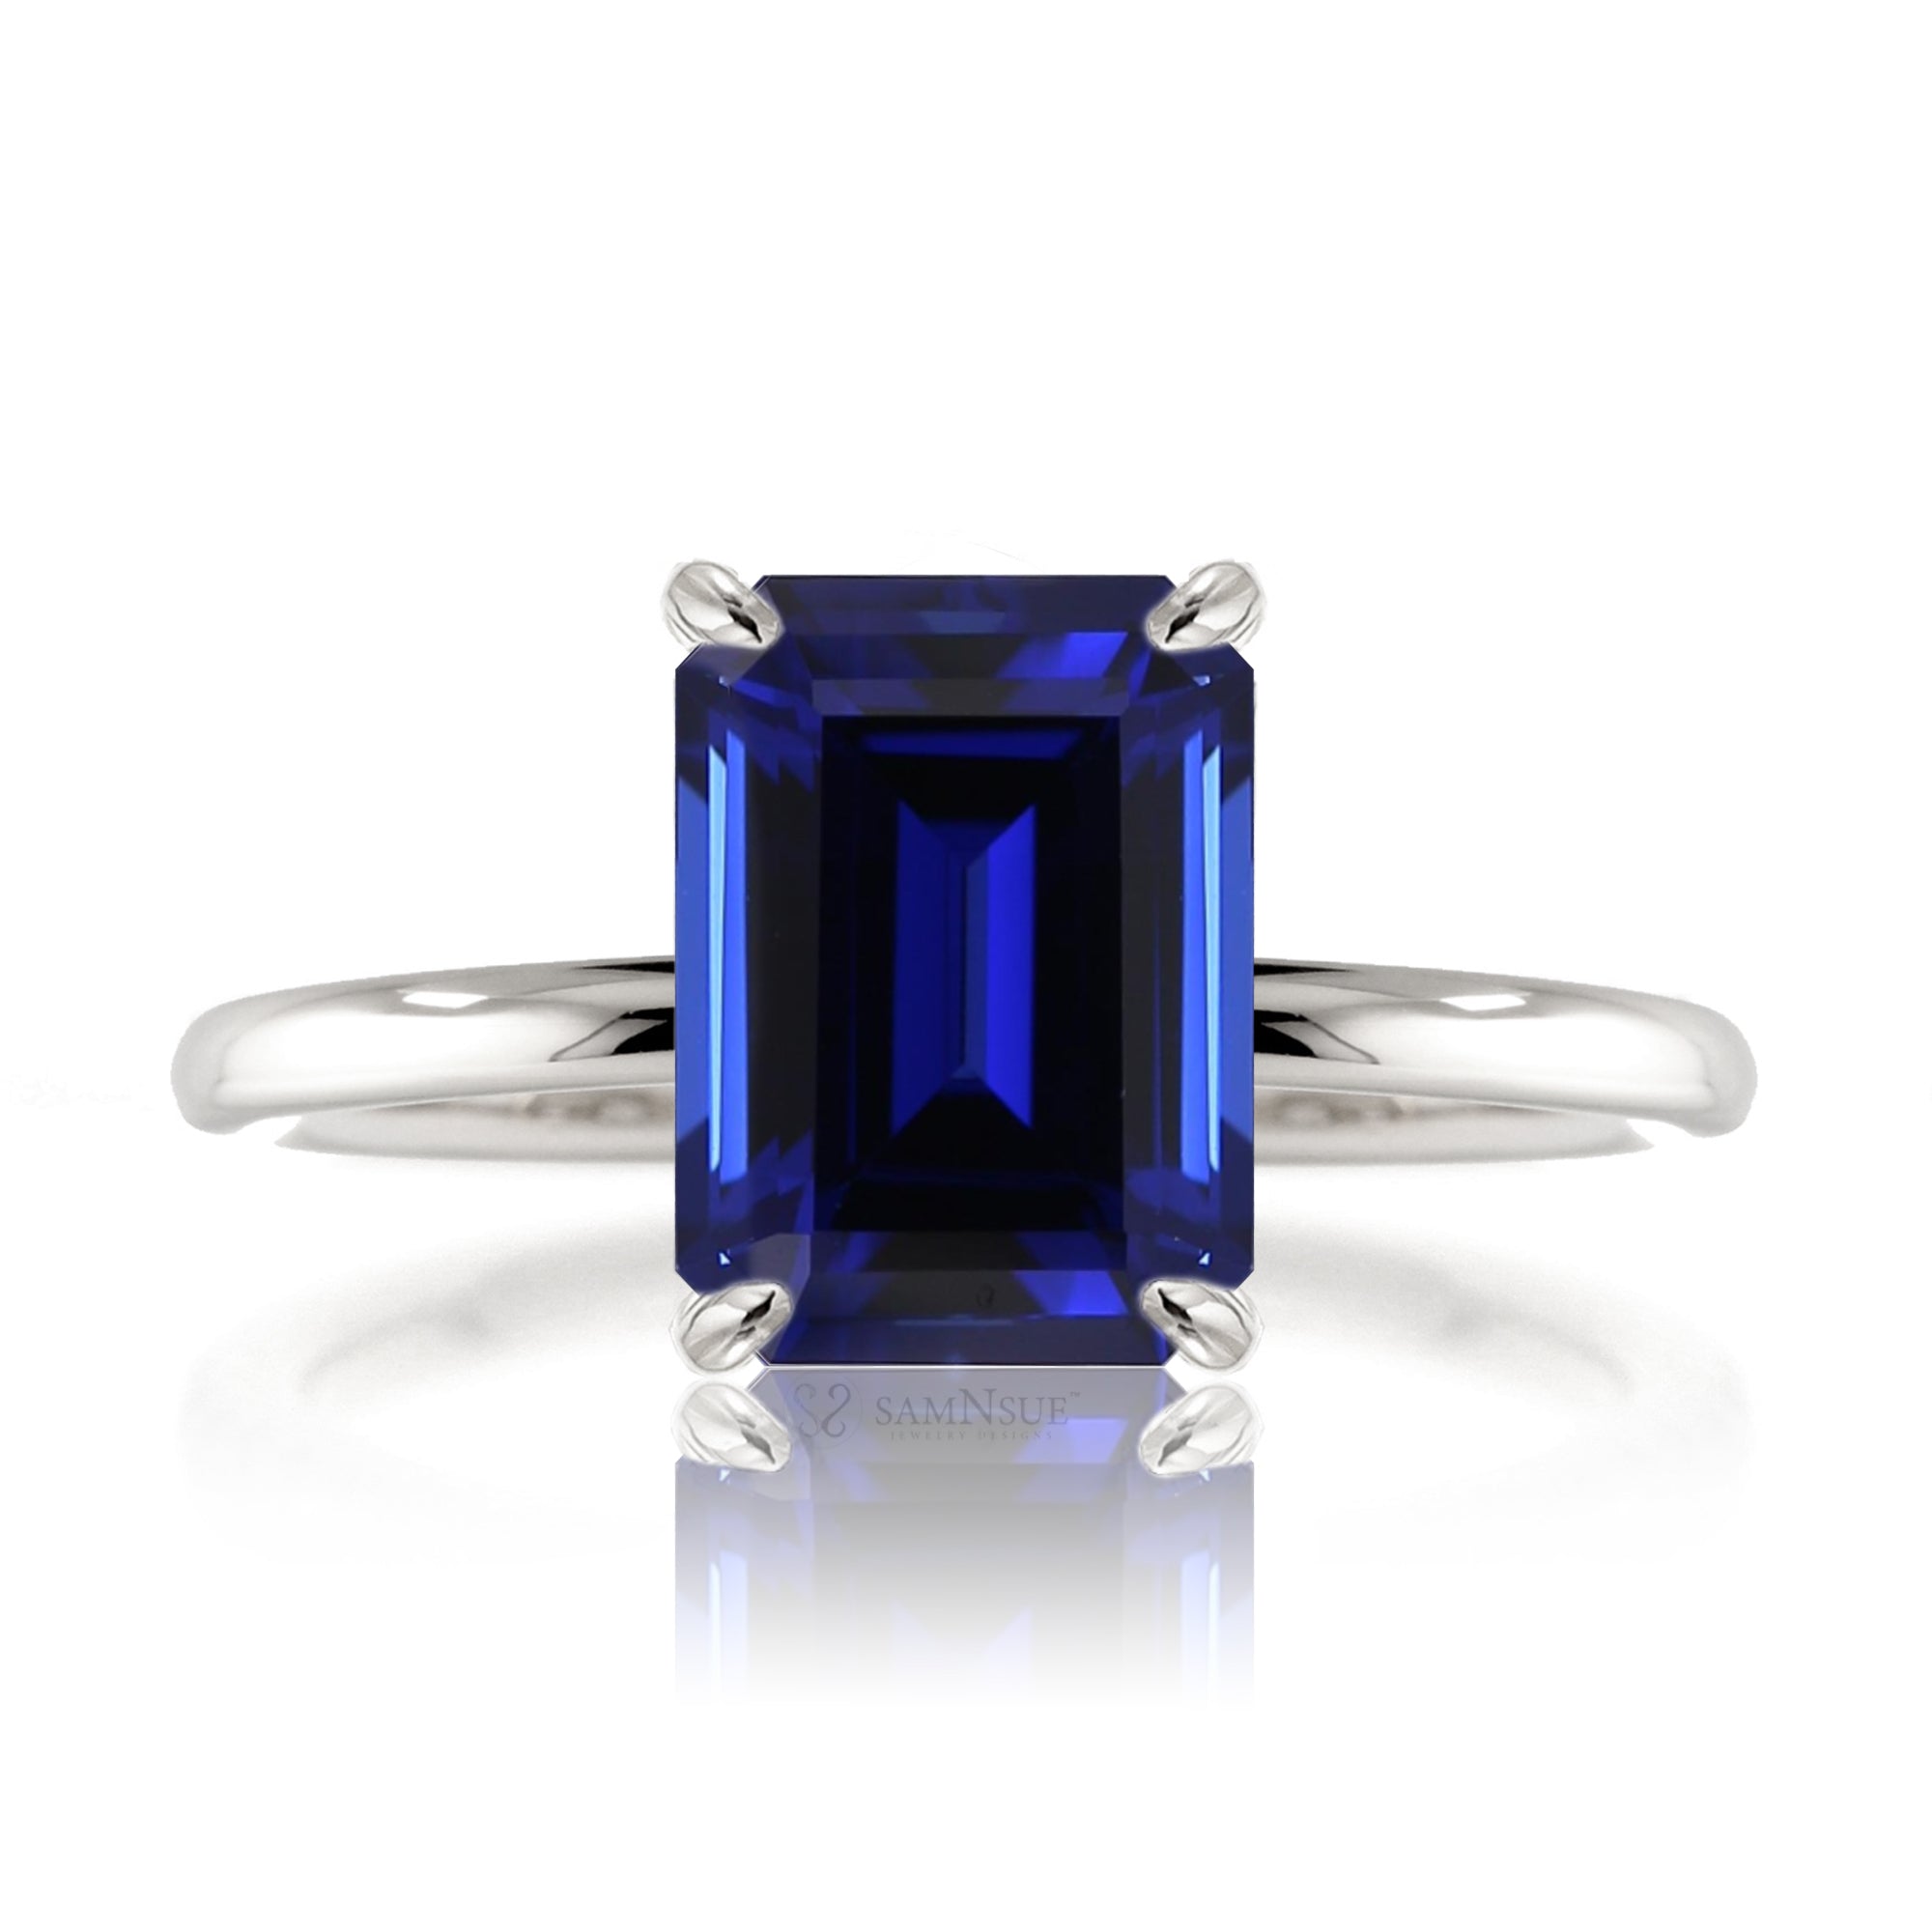 Emerald cut blue sapphire solid engagement ring white gold - the Ava